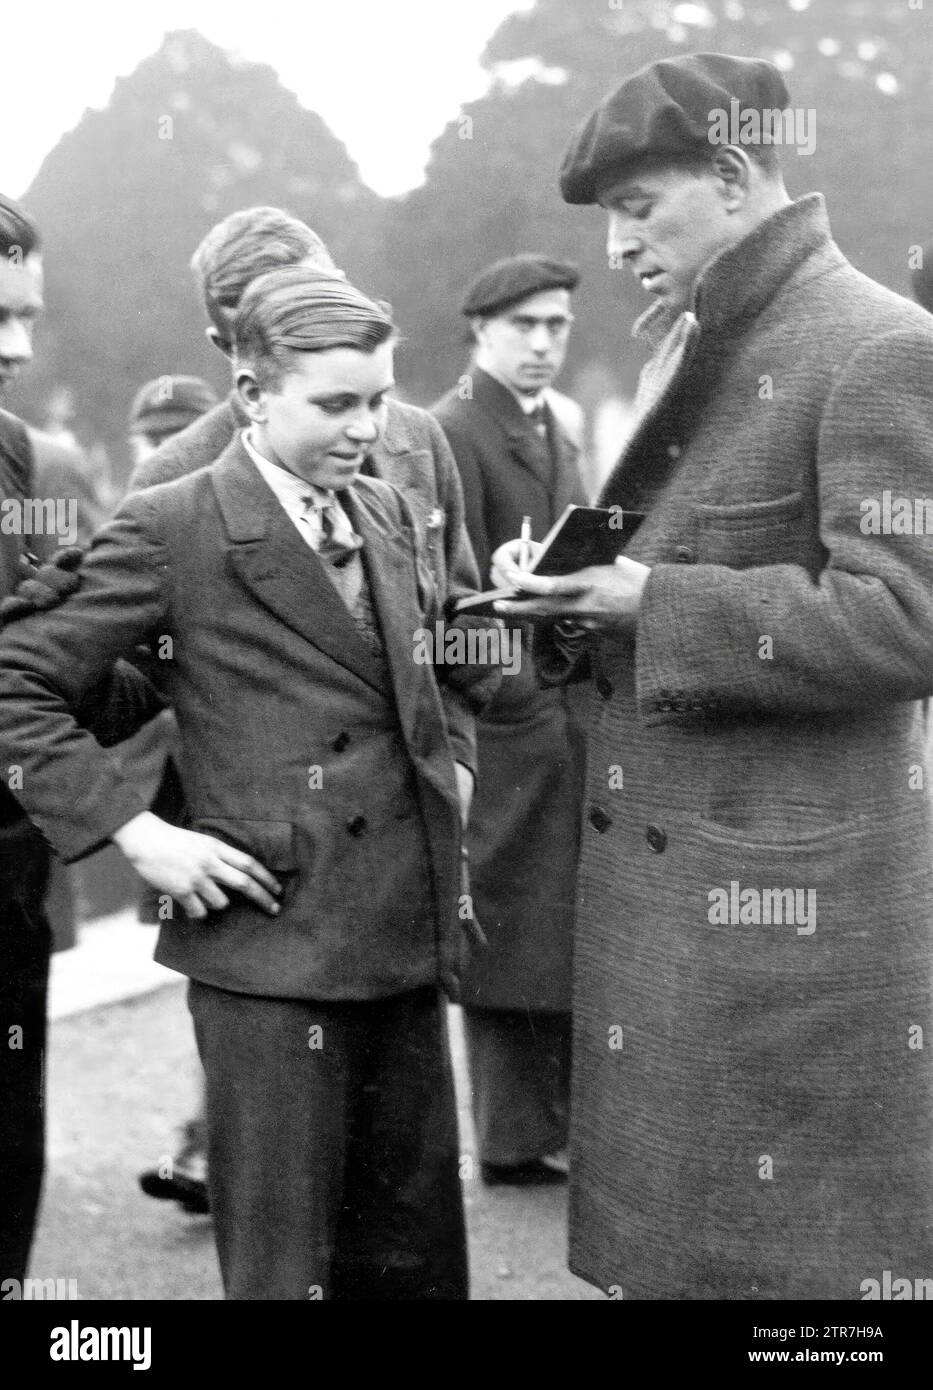 12/07/1931. Zamora Signing an autograph in London. Credit: Album / Archivo ABC Stock Photo